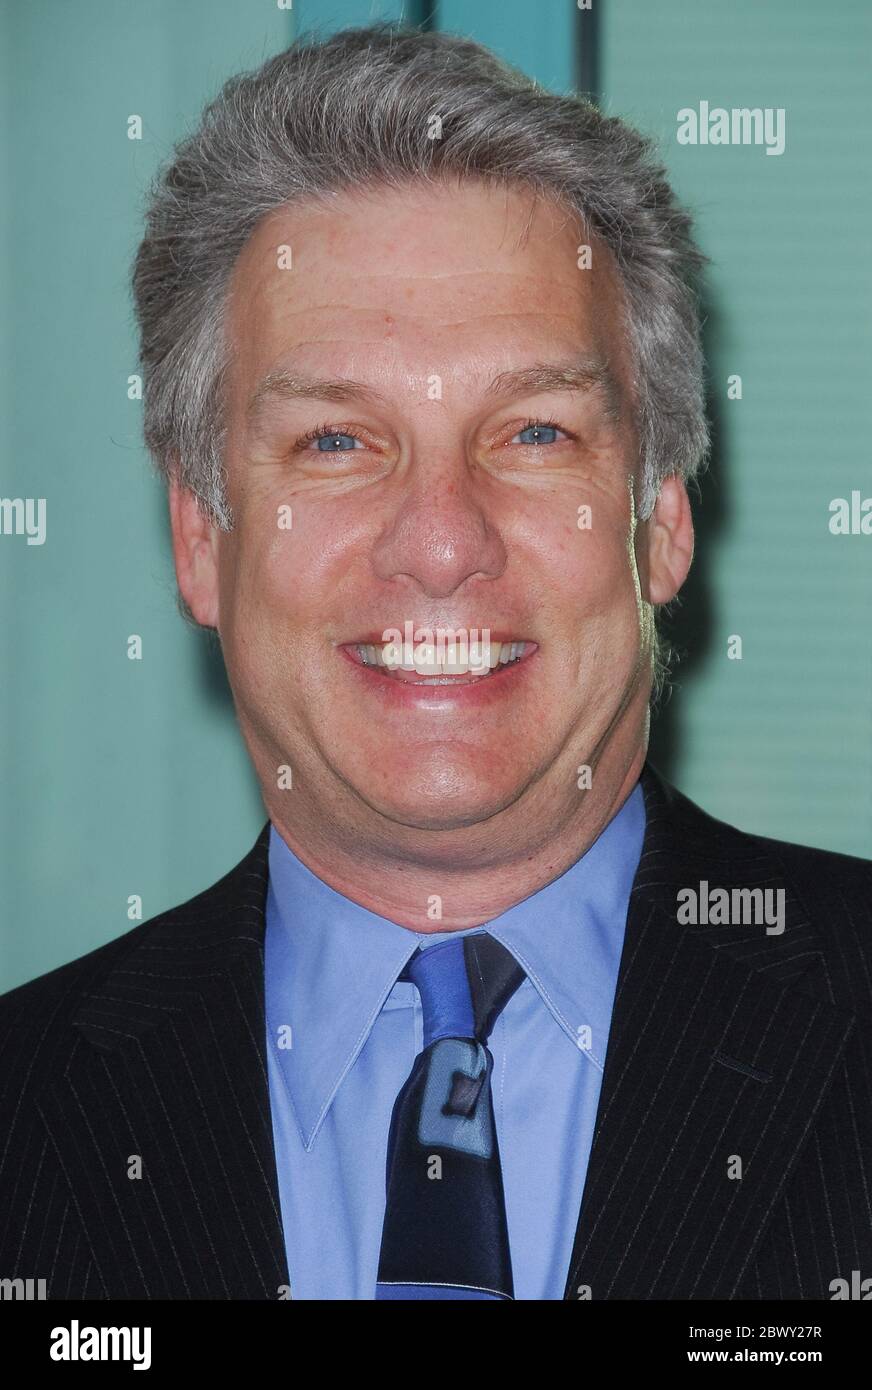 Marc Summers at the Academy of Television Arts & Sciences Presents 'A Special Evening with Bob Barker' held at The Leonard Goldenson Theater in North Hollywood, CA. The event took place on Monday, May 7, 2007. Photo by: SBM / PictureLux- File Reference # 34006-4353SBMPLX Stock Photo